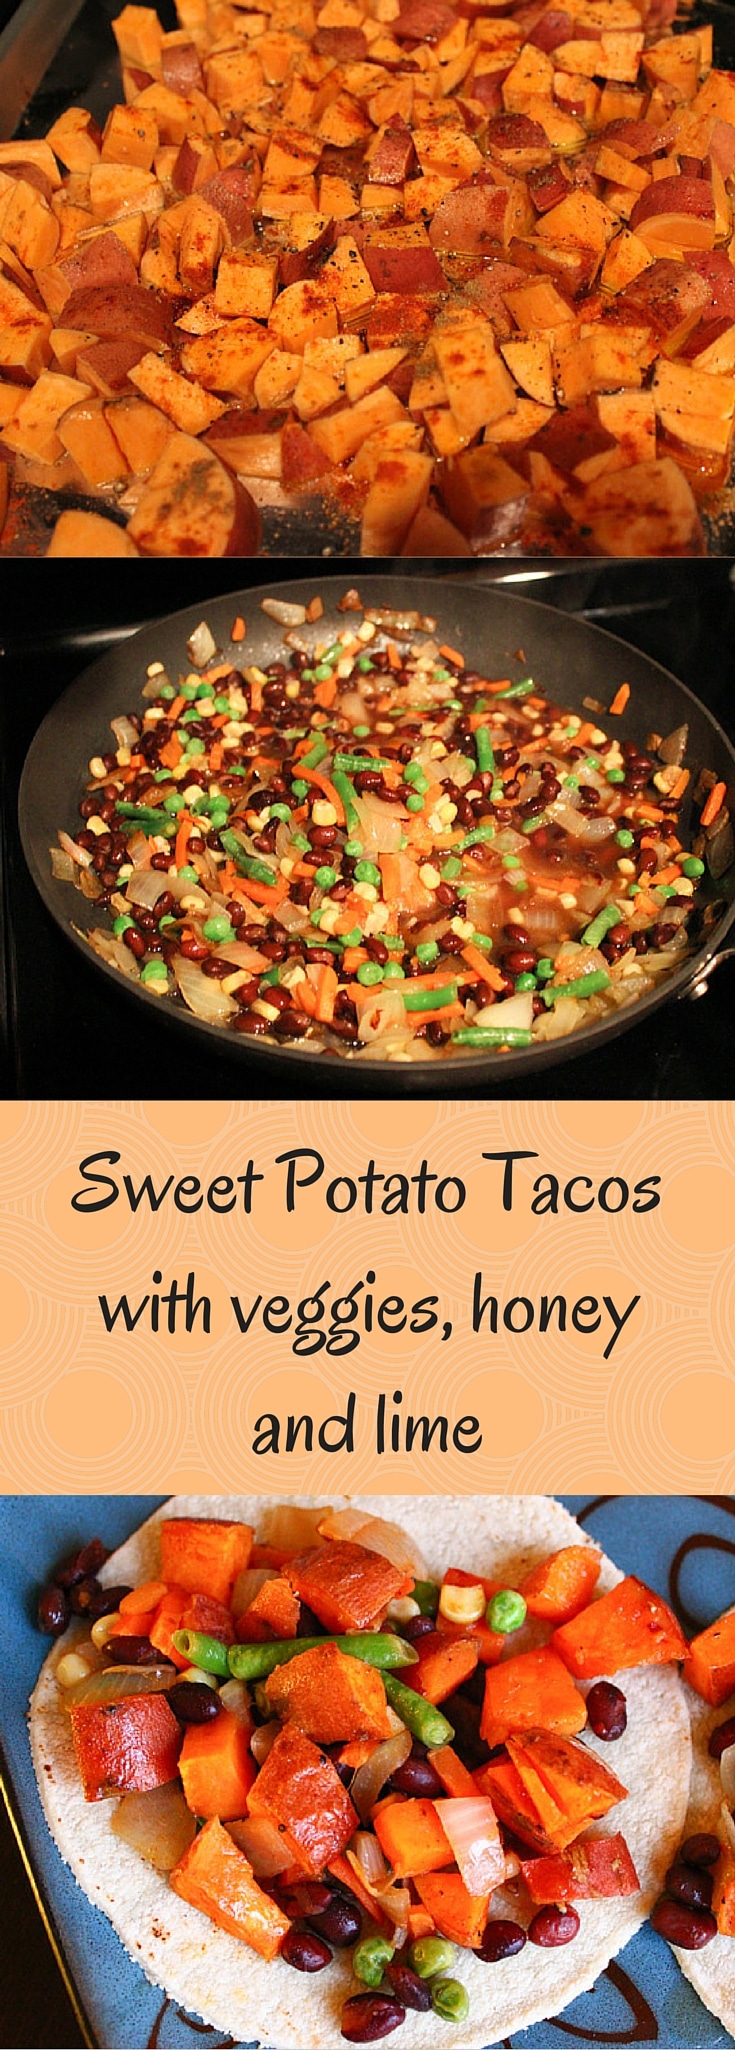 Sweet potato tacos with black beans, vegetables and a hint of honey and lime. Flavorful vegetarian dinner the whole family will love!